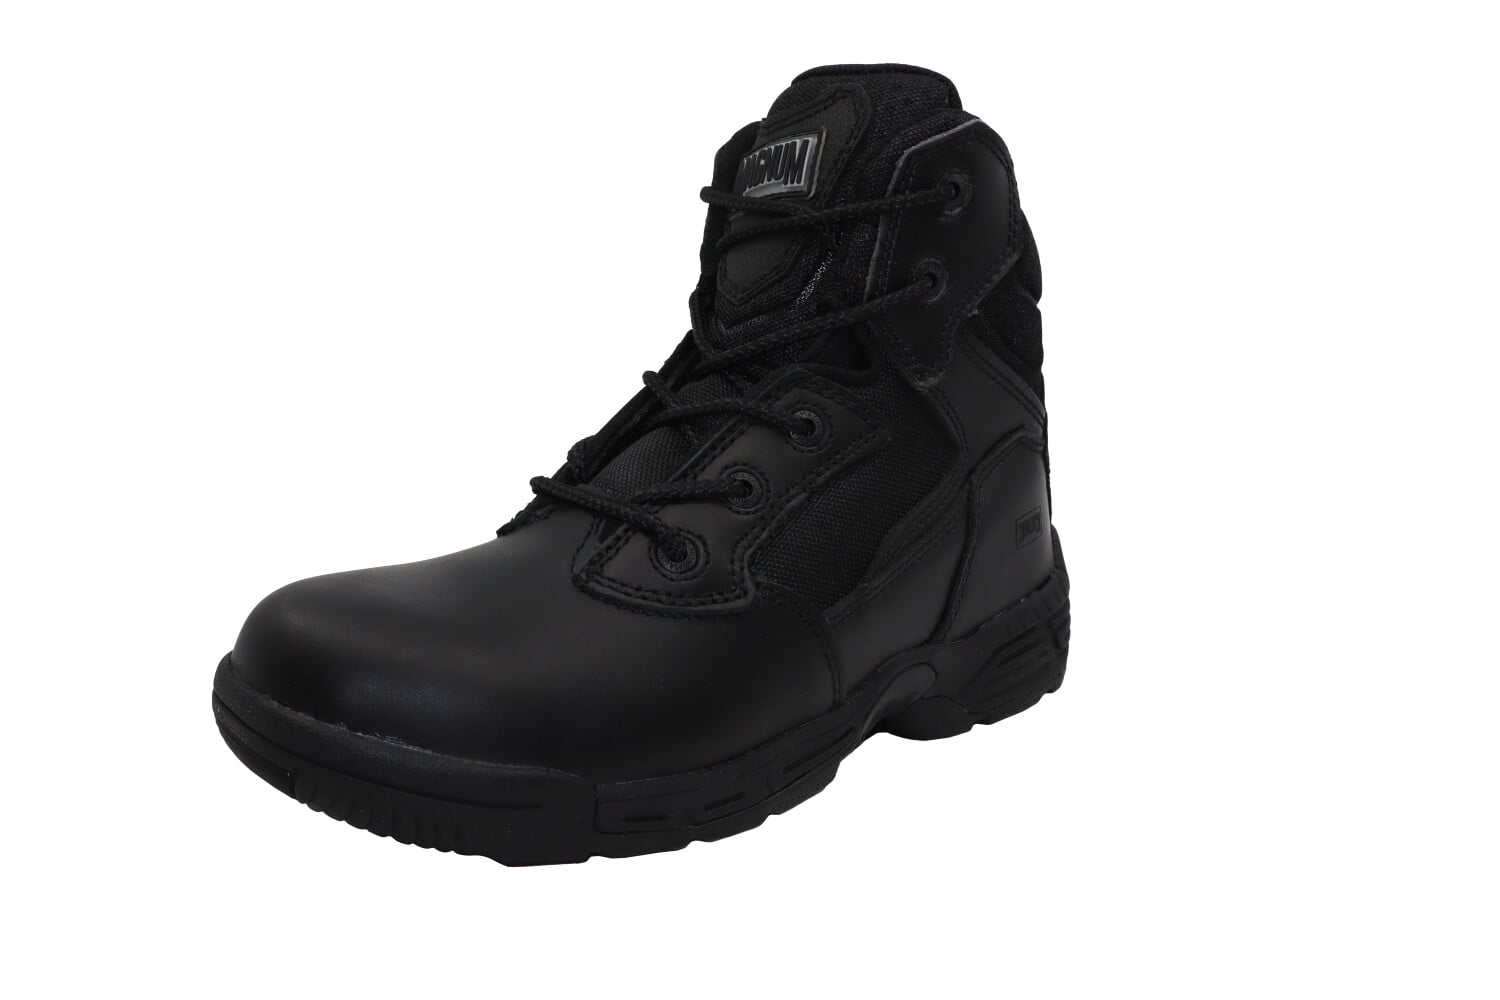 Army Hi-Tec Magnum Leather Boots Police Combat Black NON SAFETY Security 